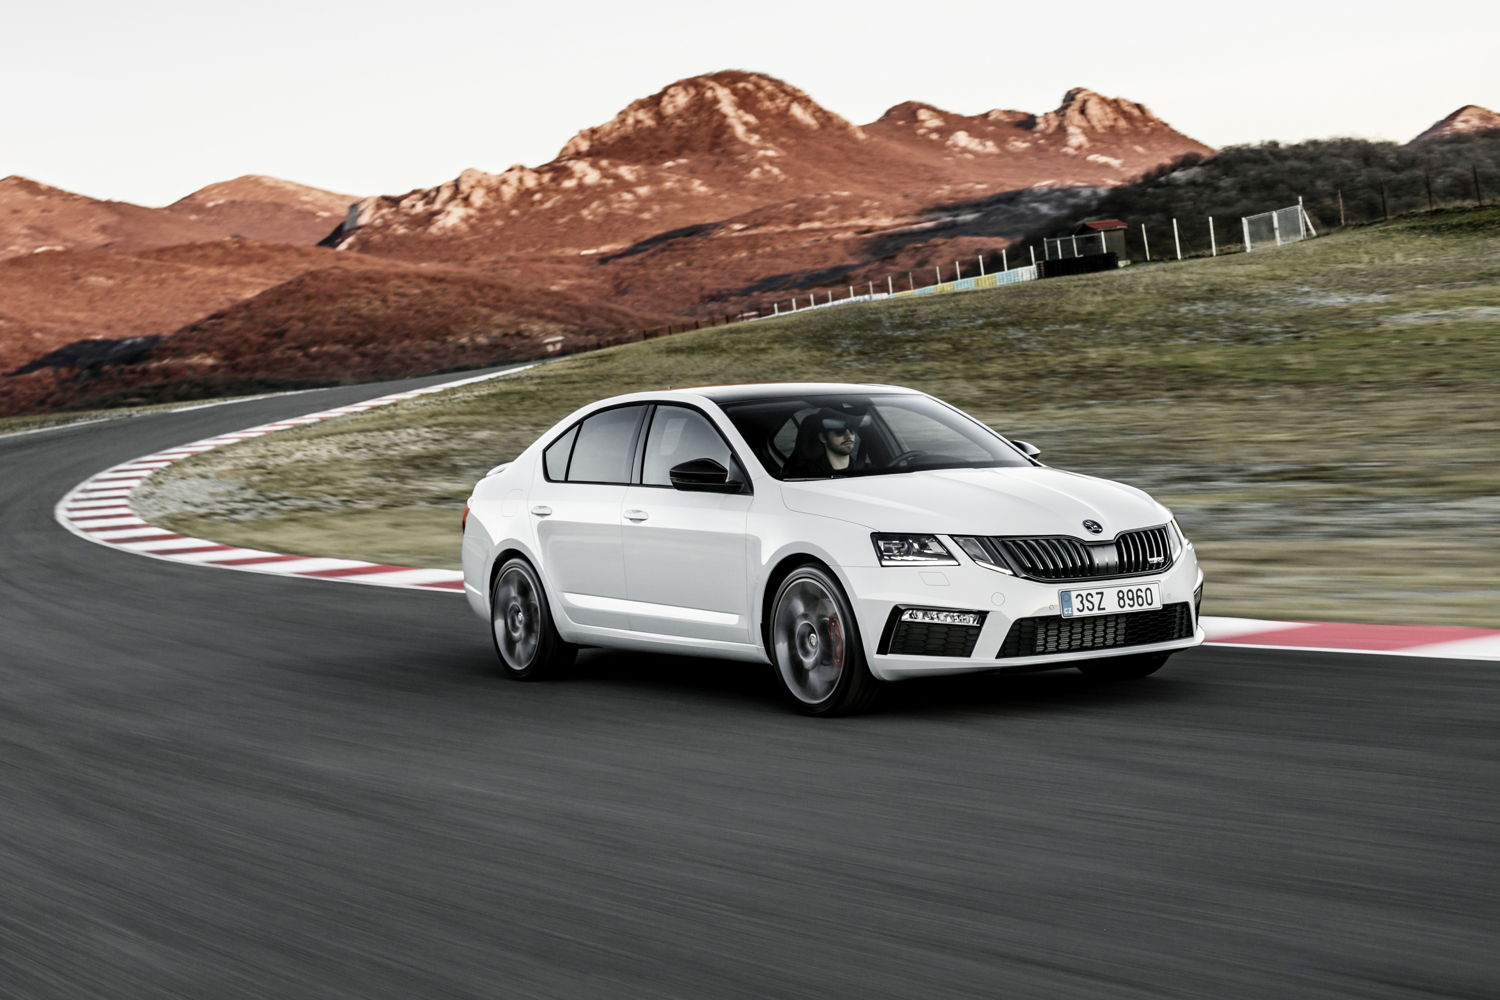 With an output of up to 180 kW (245 PS), the thirdgeneration
OCTAVIA RS introduces the continuous
reflective strip at the rear. The 135-kW (184-PS) 2.0 TDI
variant is also available with all-wheel-drive.